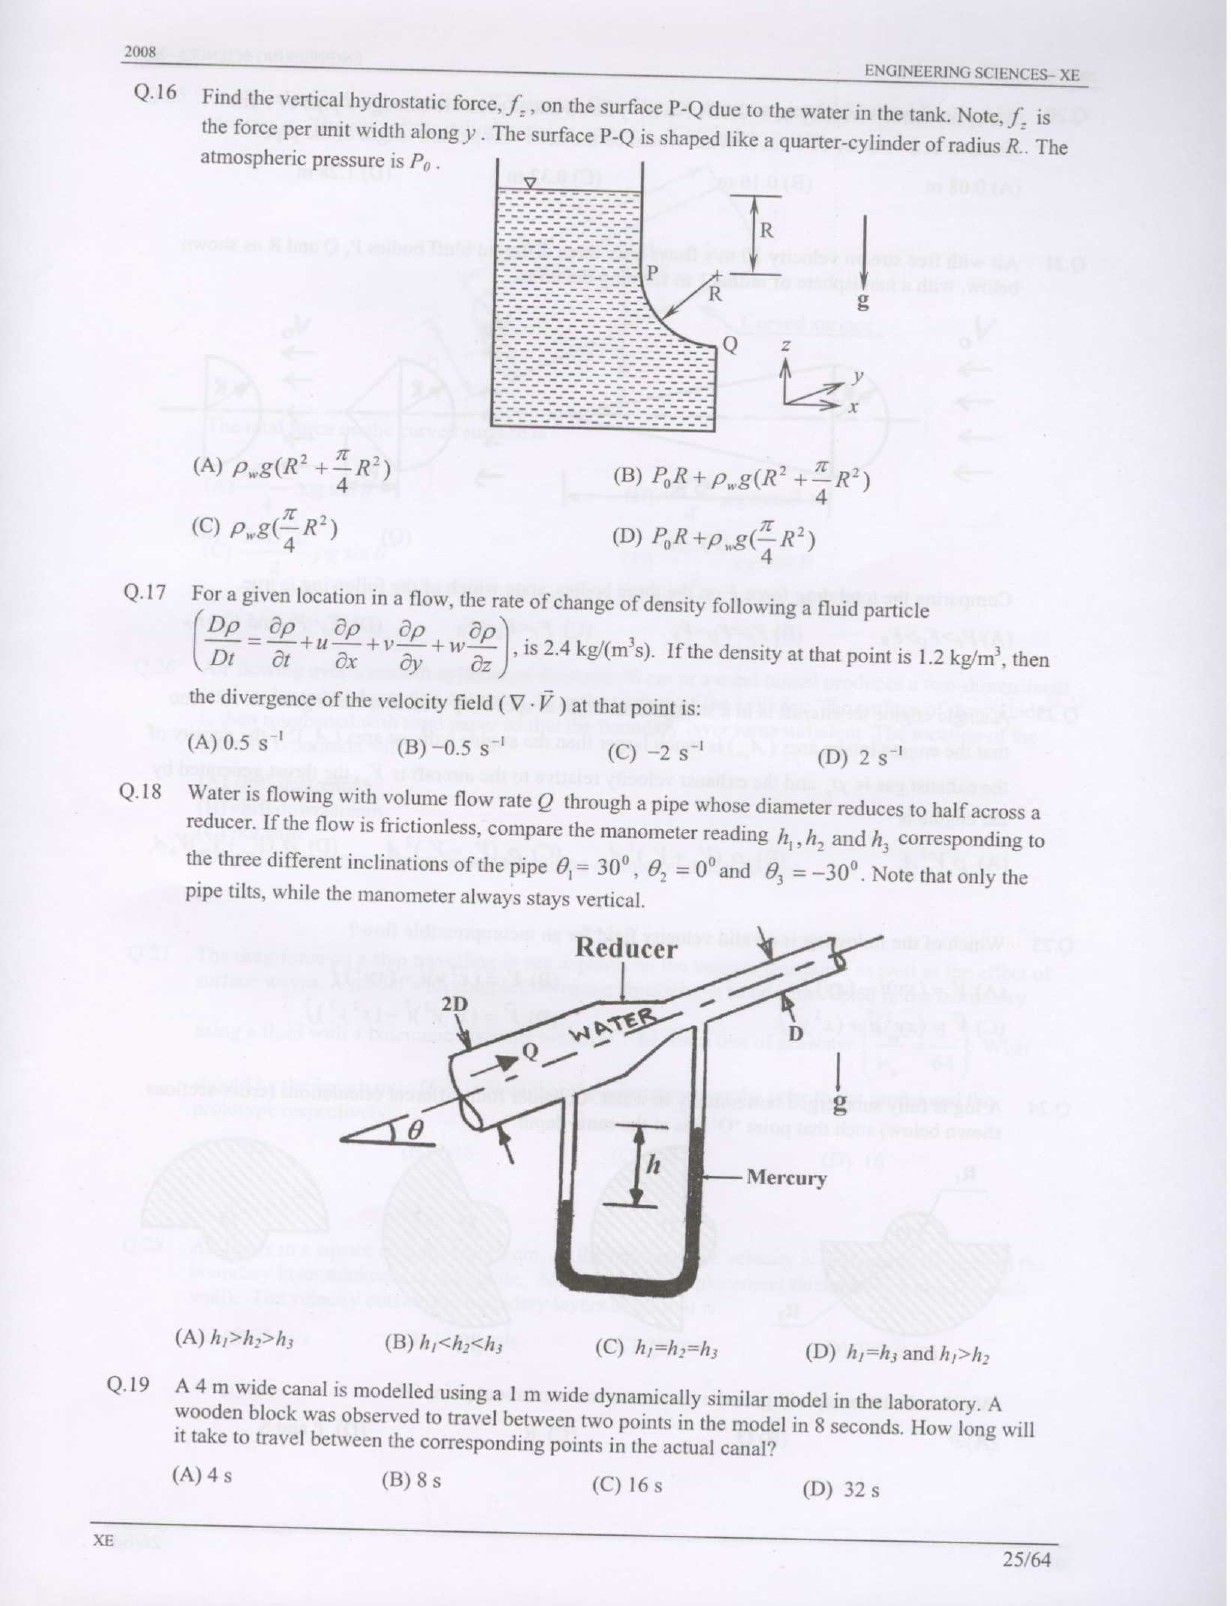 GATE Exam Question Paper 2008 Engineering Sciences 25